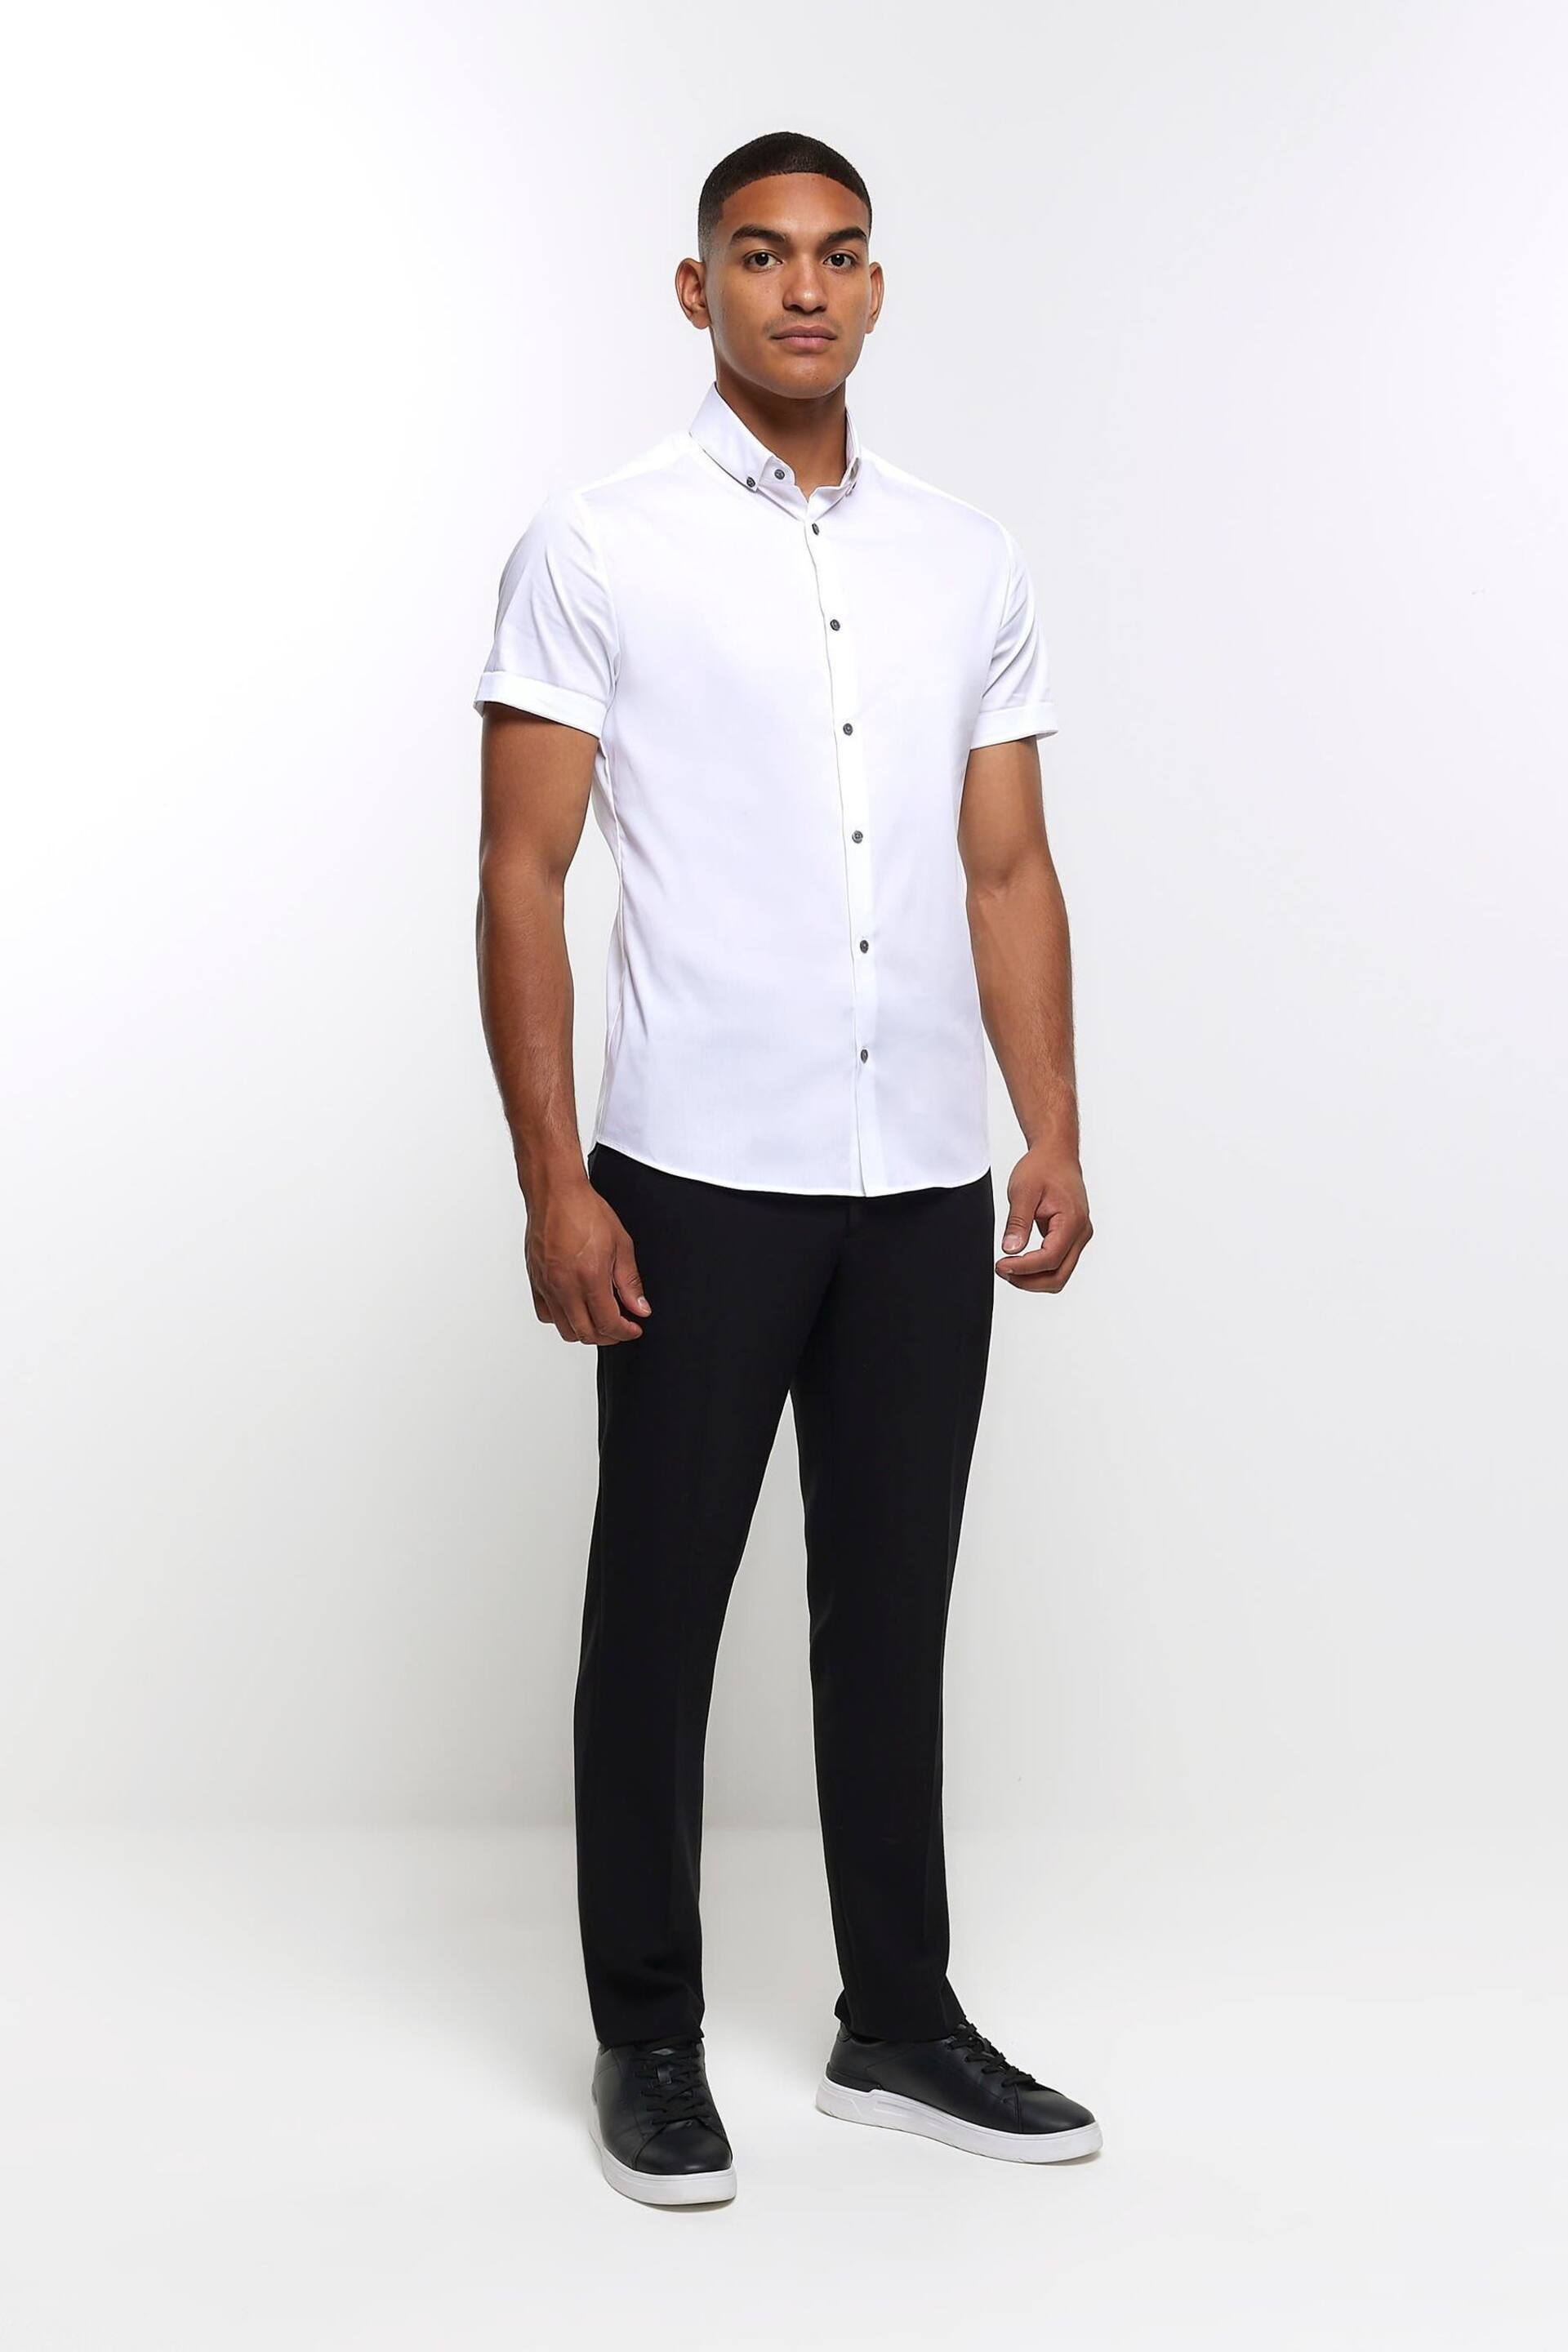 River Island Off white Muscle Fit Shirt - Image 3 of 6